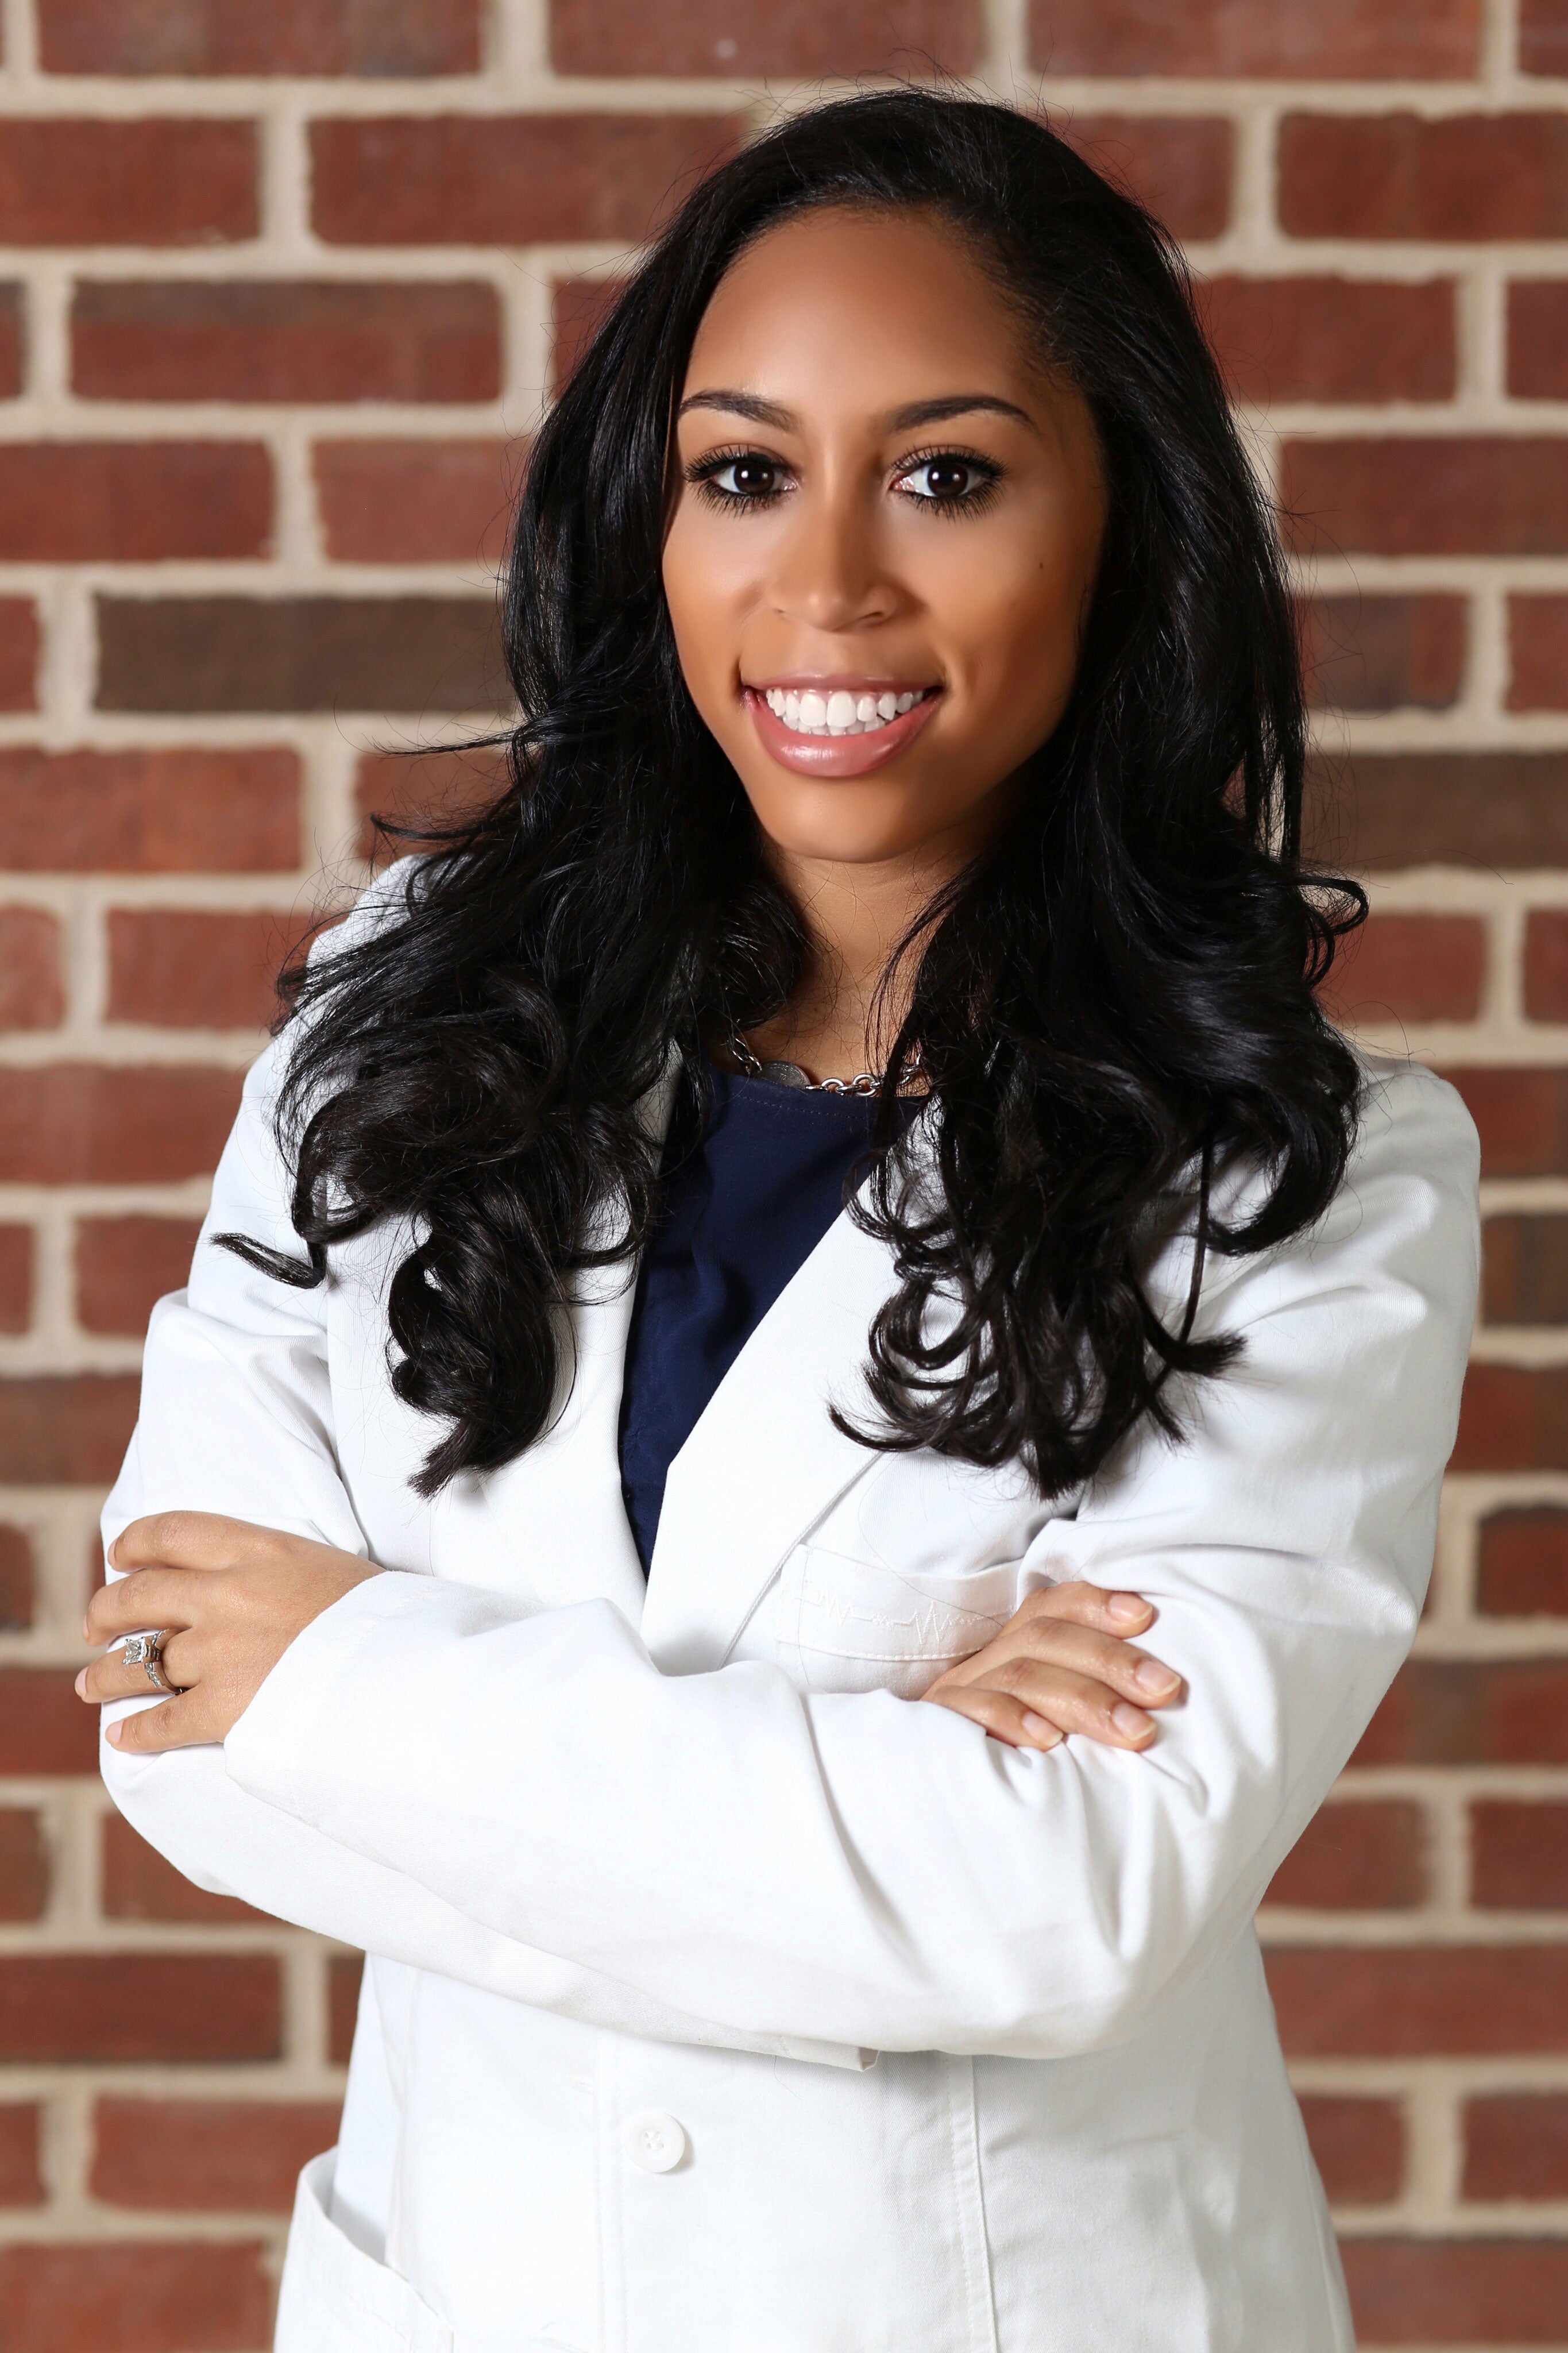 Meet Tera Poole, the First Black Valedictorian At World’s First School of Dentistry
